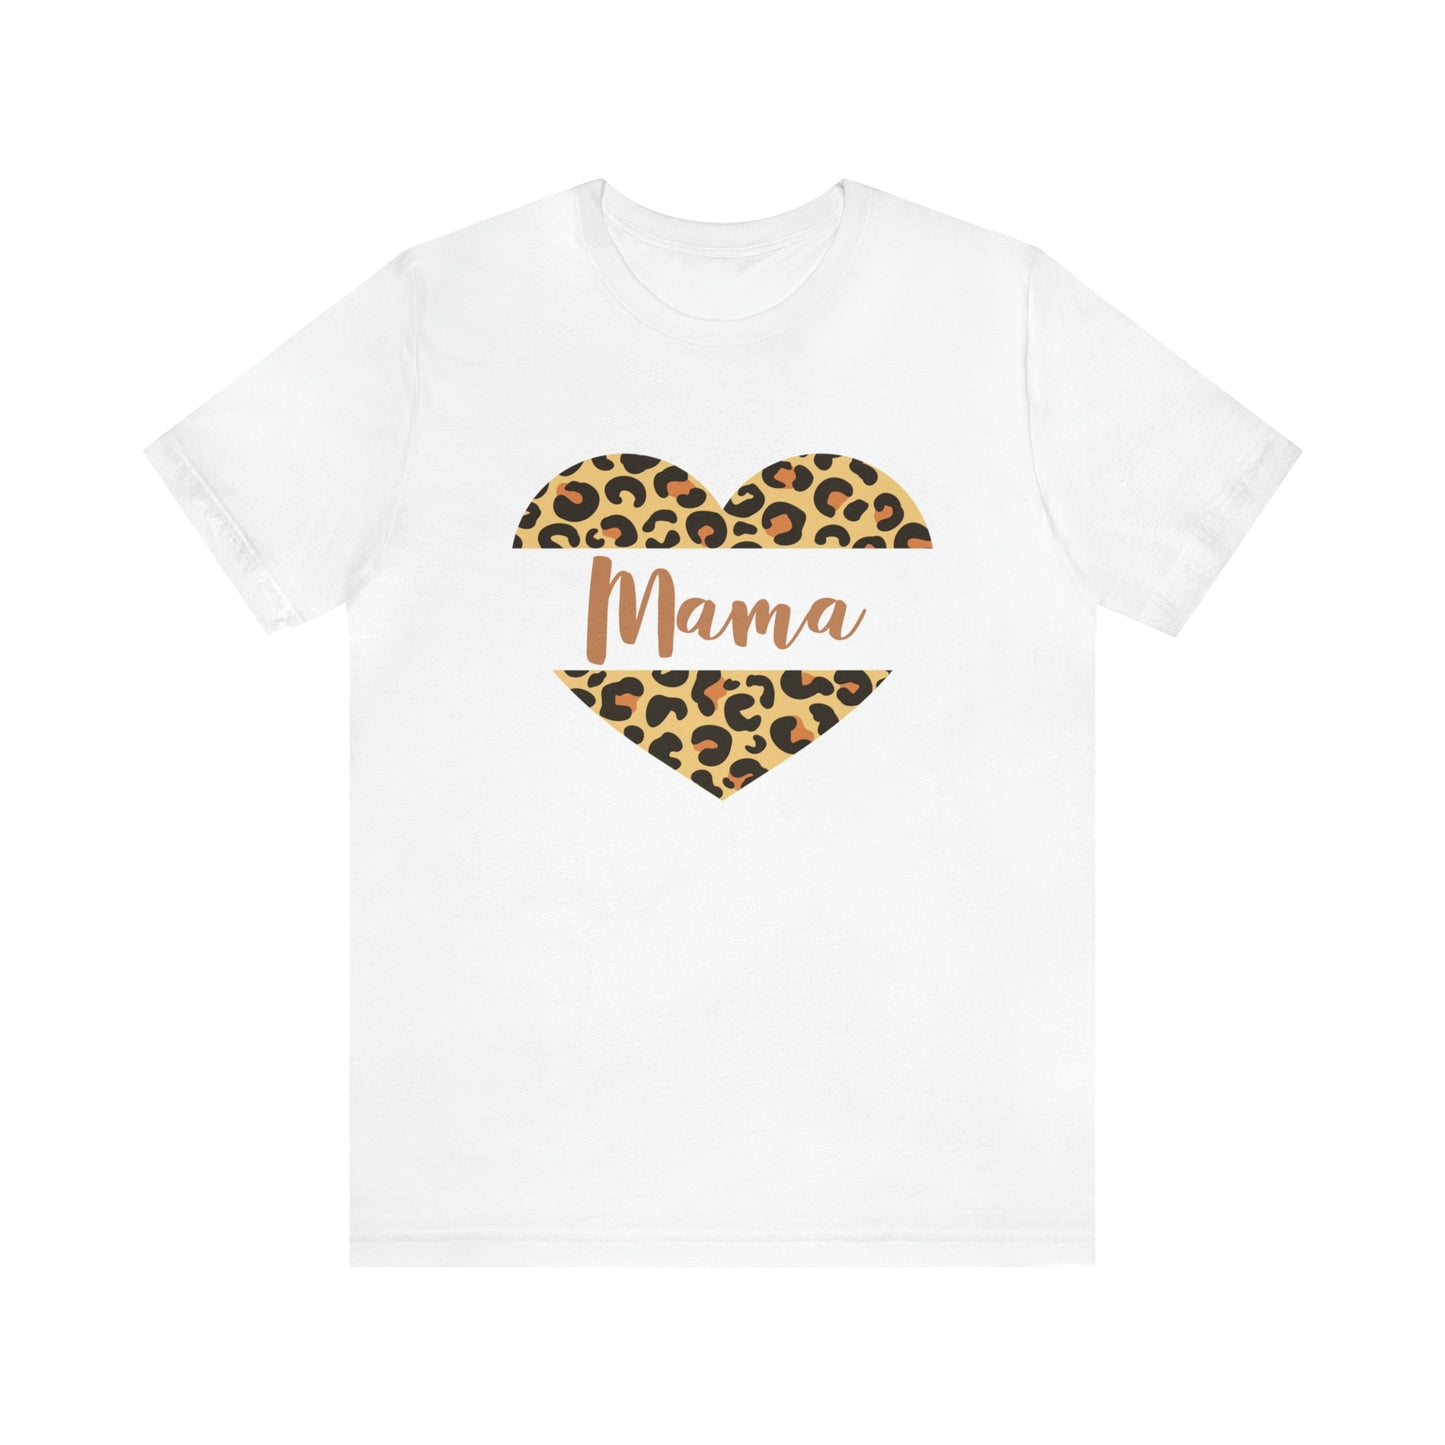 Mama Leopard Heart  Shirt, Mother's Day Gift for Mom, Cute Mama Shirt, Mom Birthday or Mom Christmas Gift